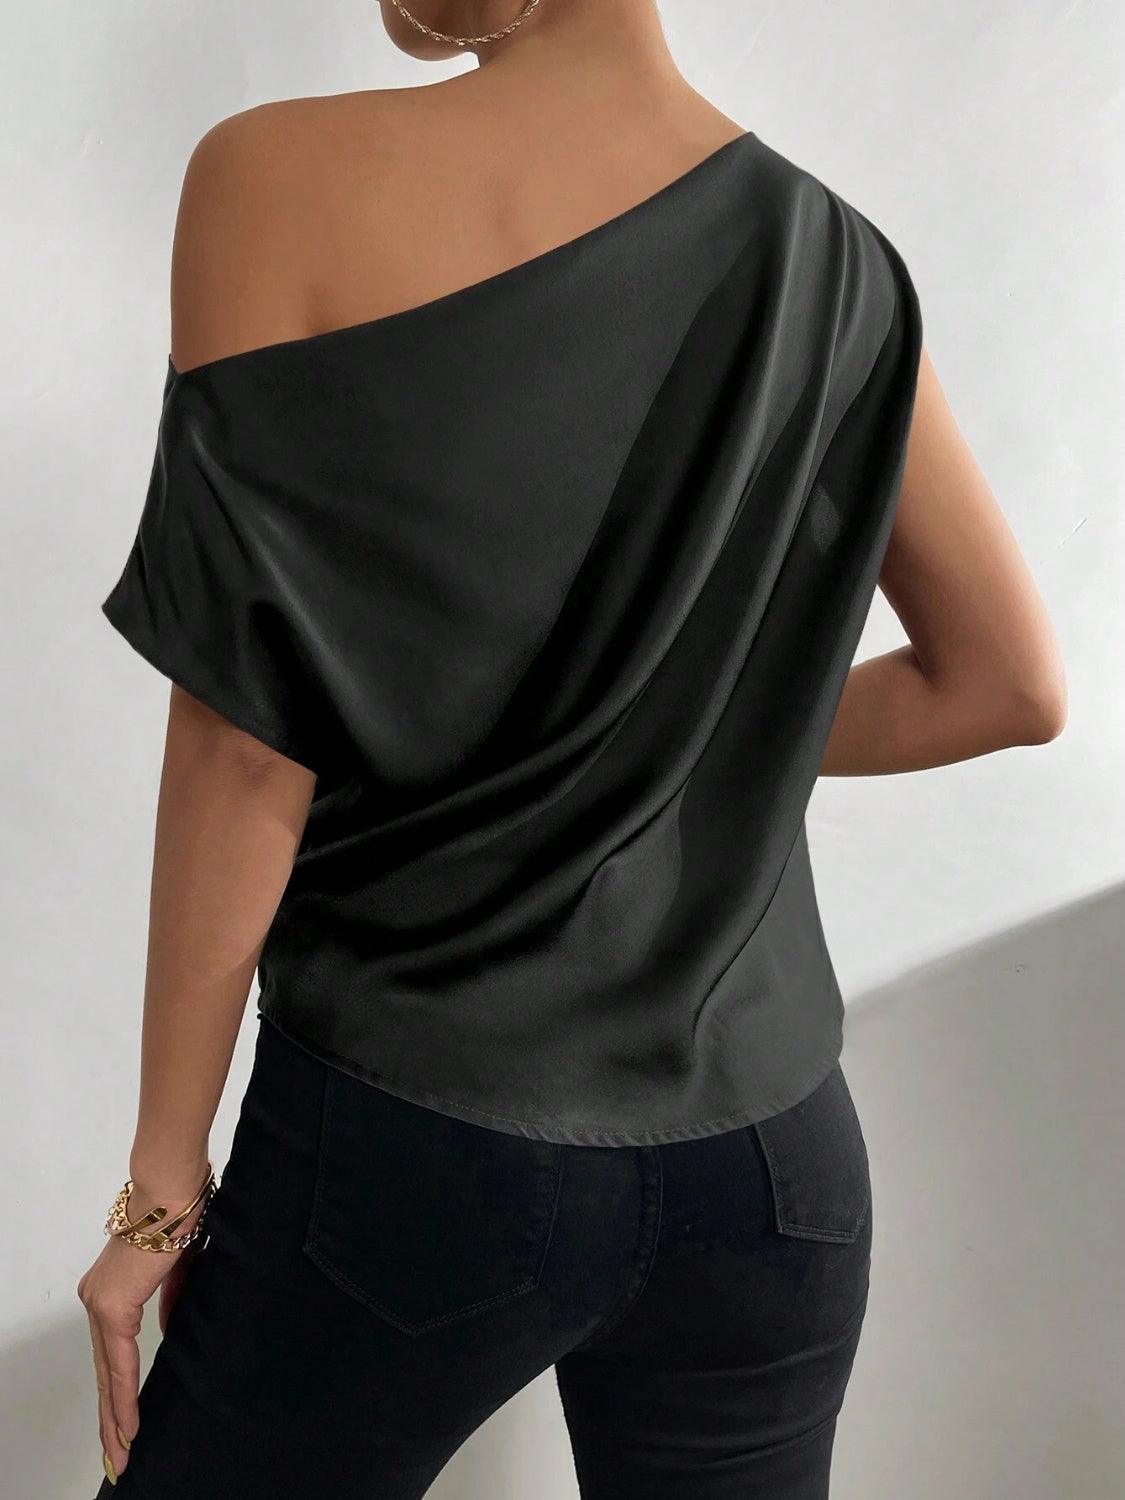 a woman wearing a black top with one shoulder